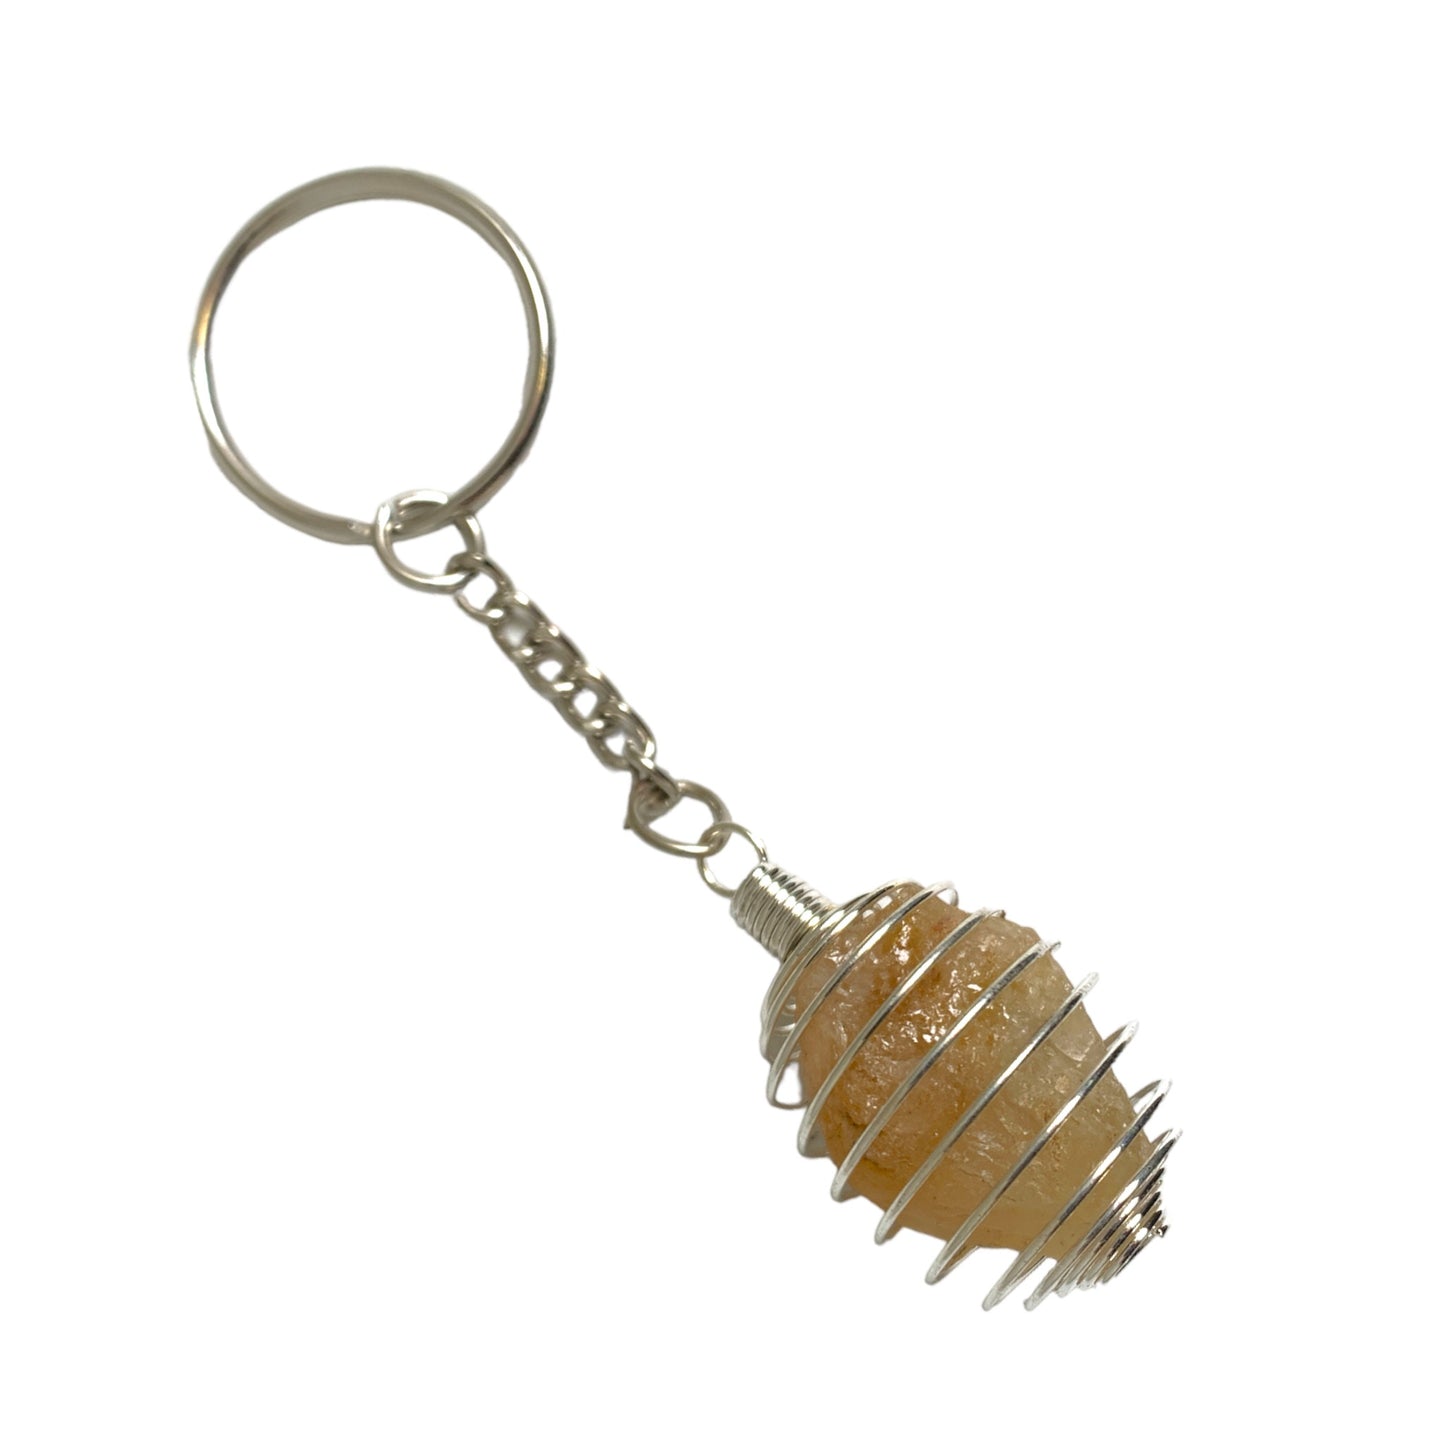 Citrine Keyring - 40mm - Raw Citrine in Cage - NEW323 - India